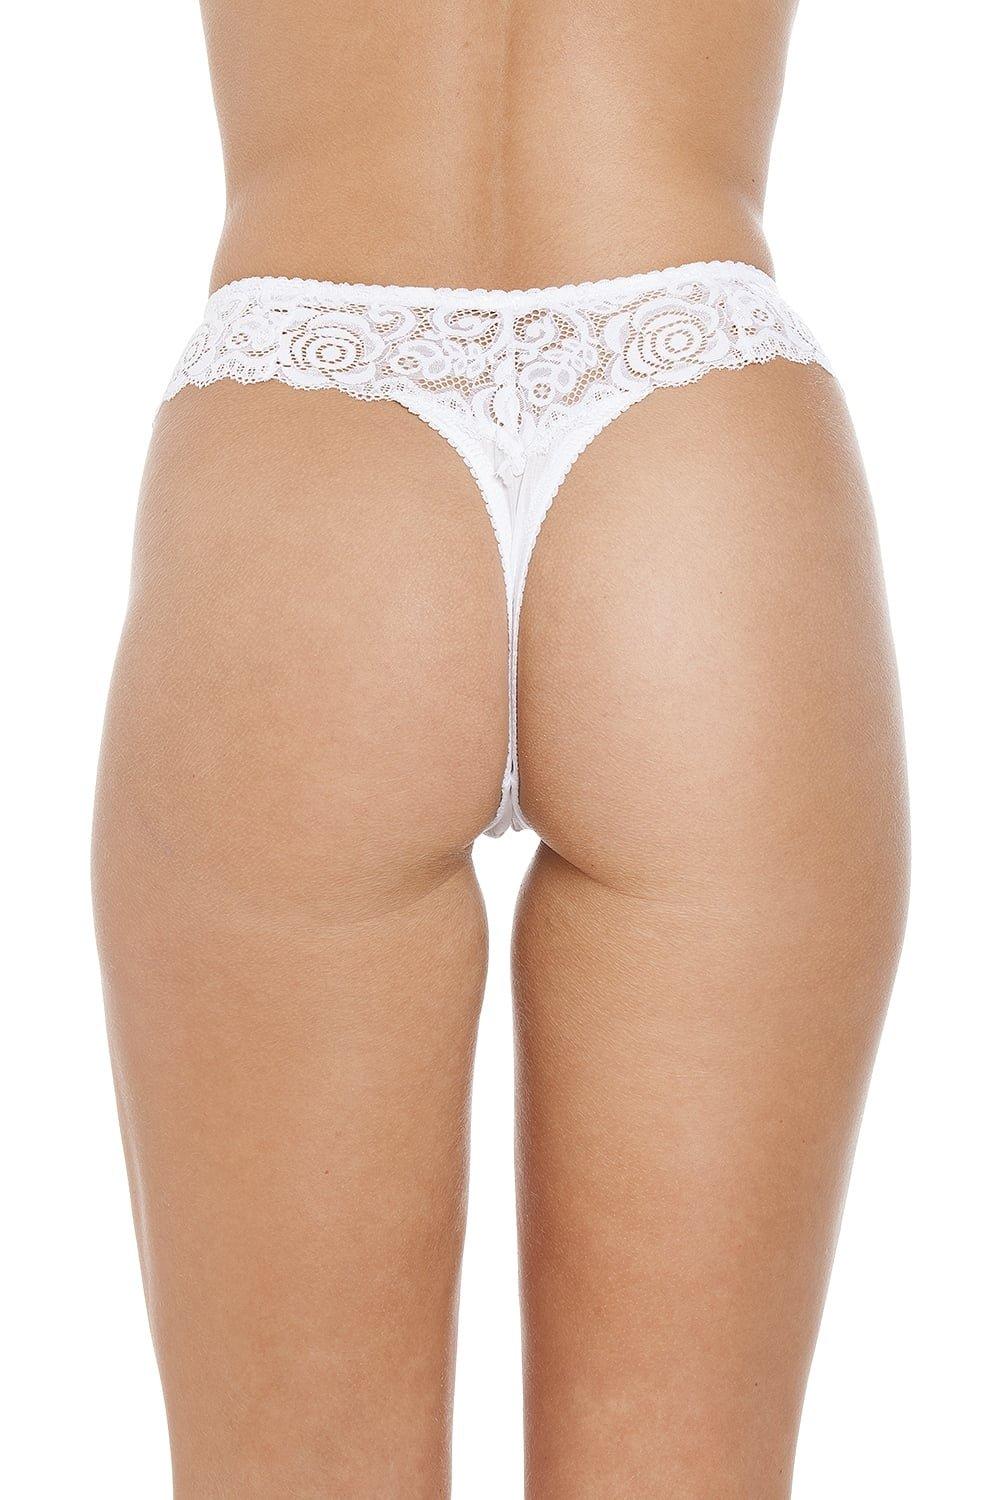 Camille Womens 2 Pack White Floral Lace Thong